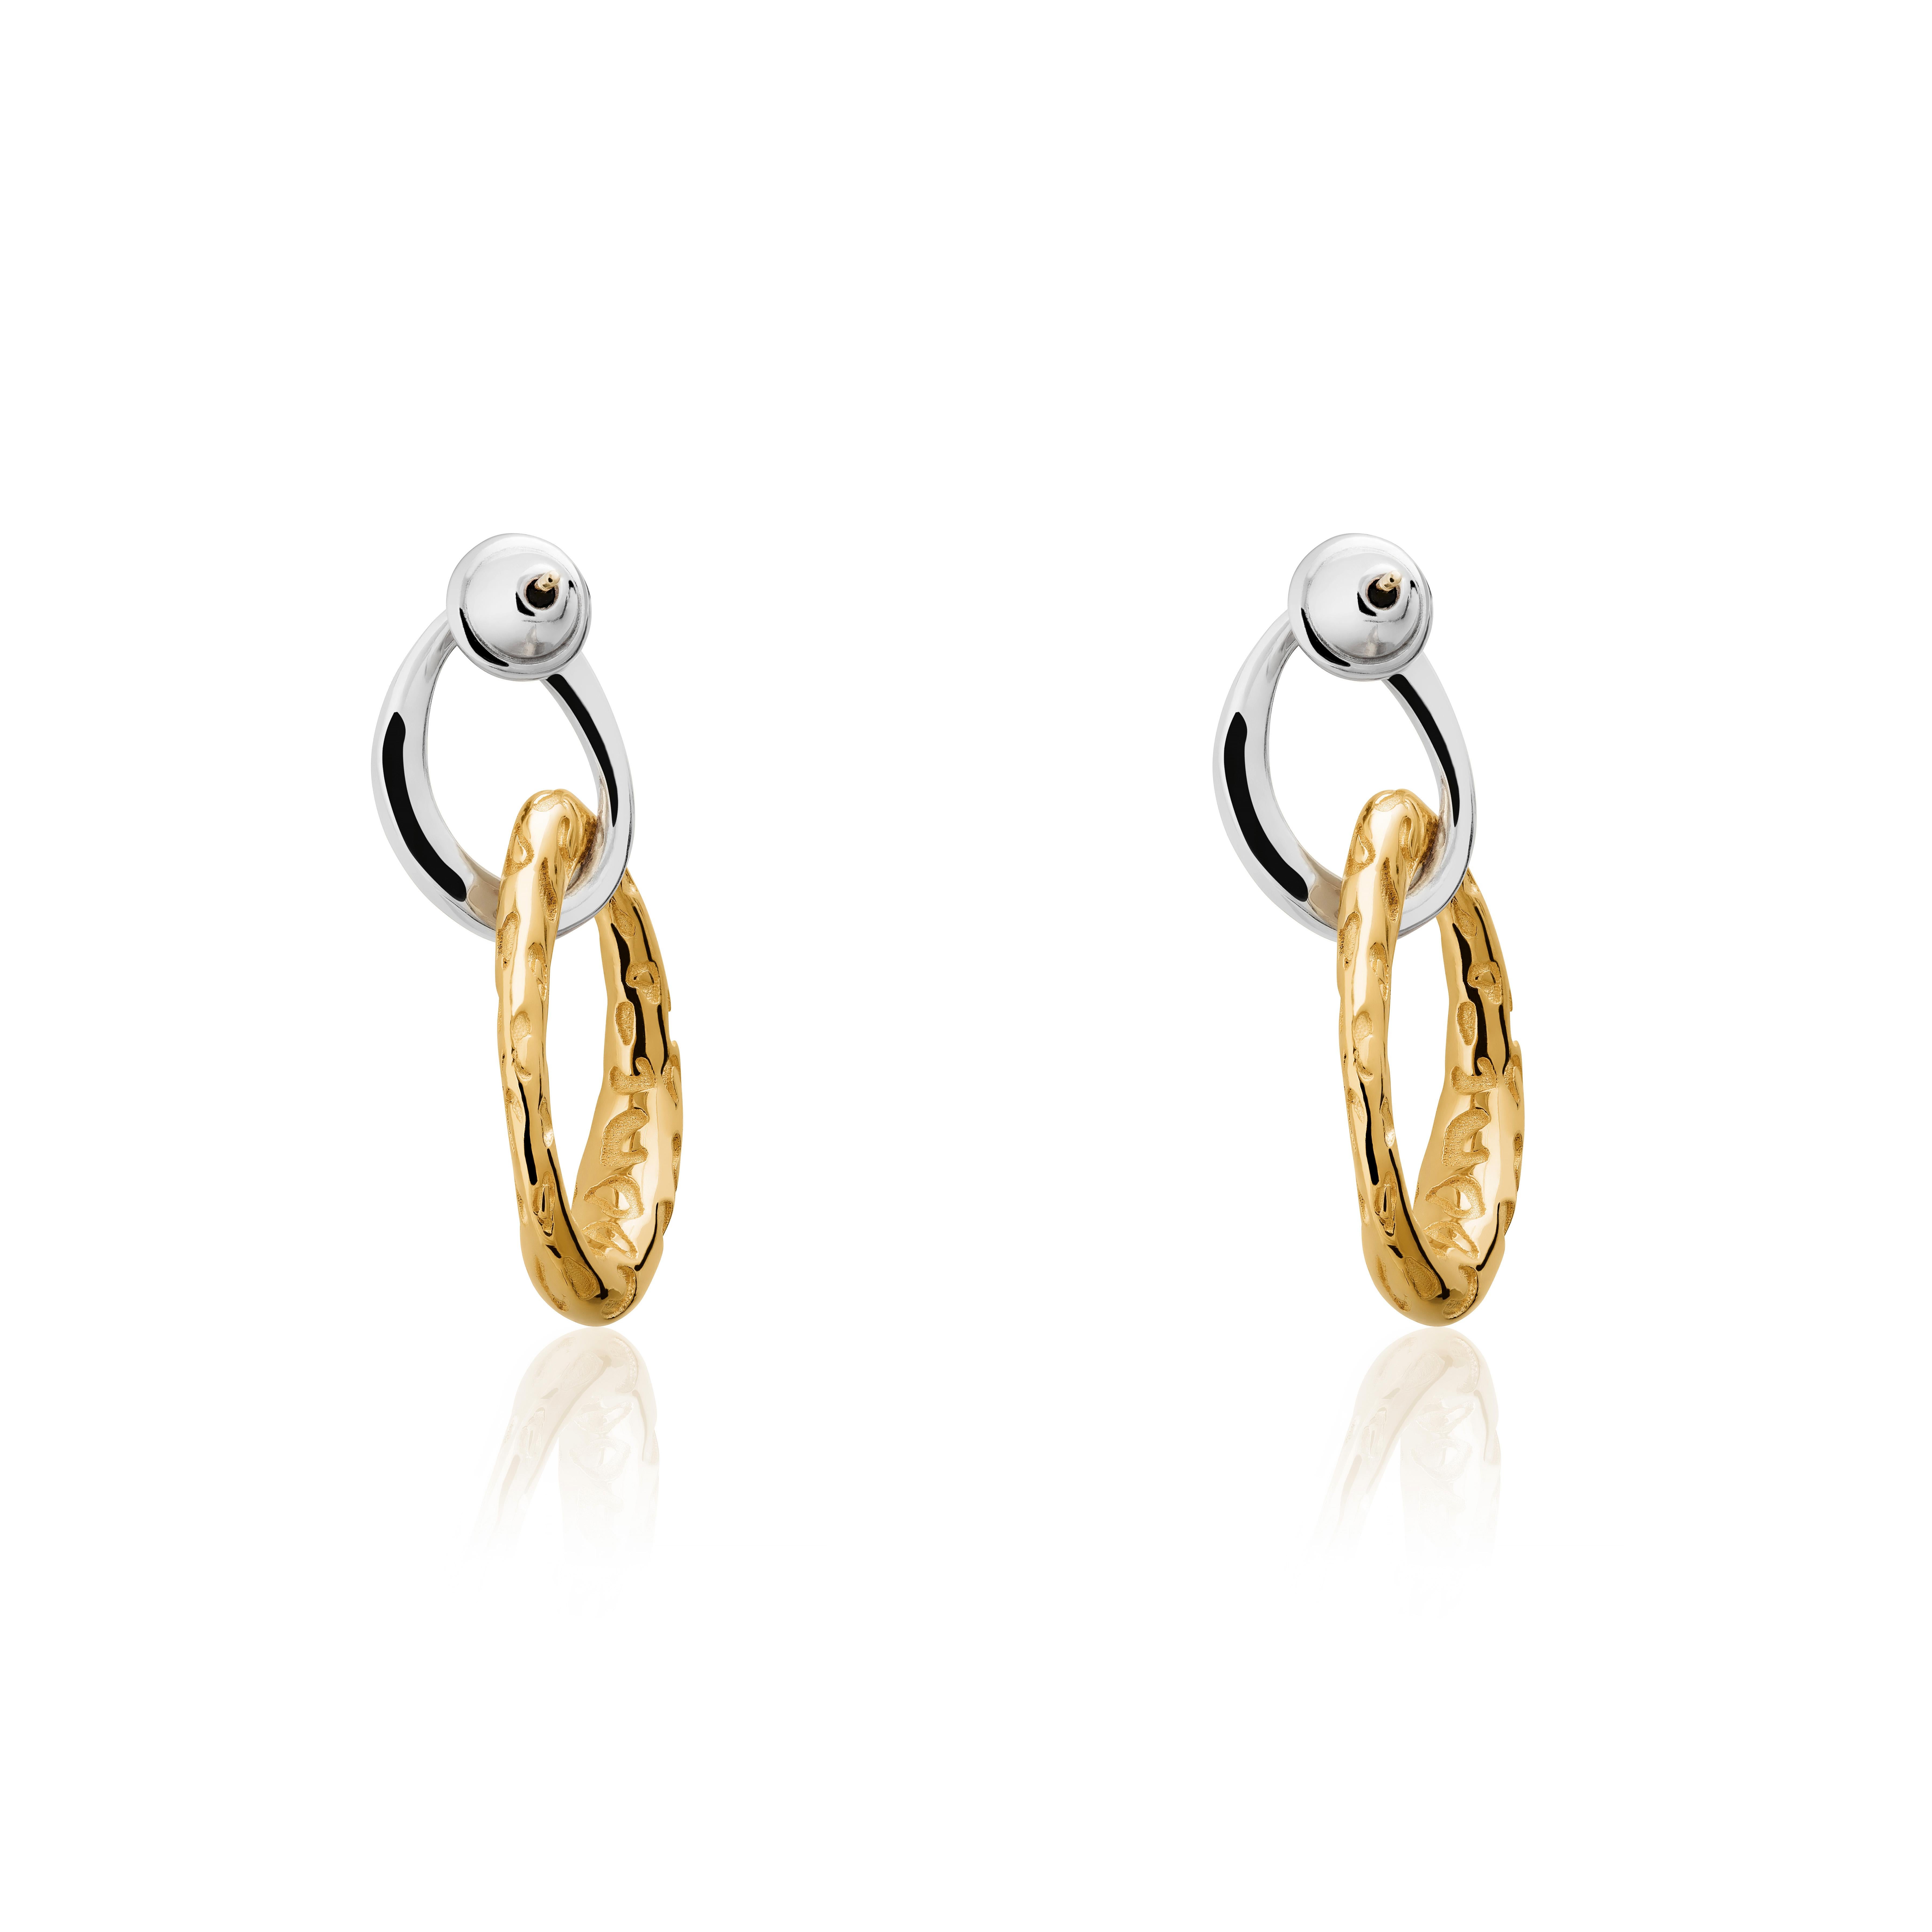 Contemporary Sterling Silver And Gold Vermeil Jaguar Earrings